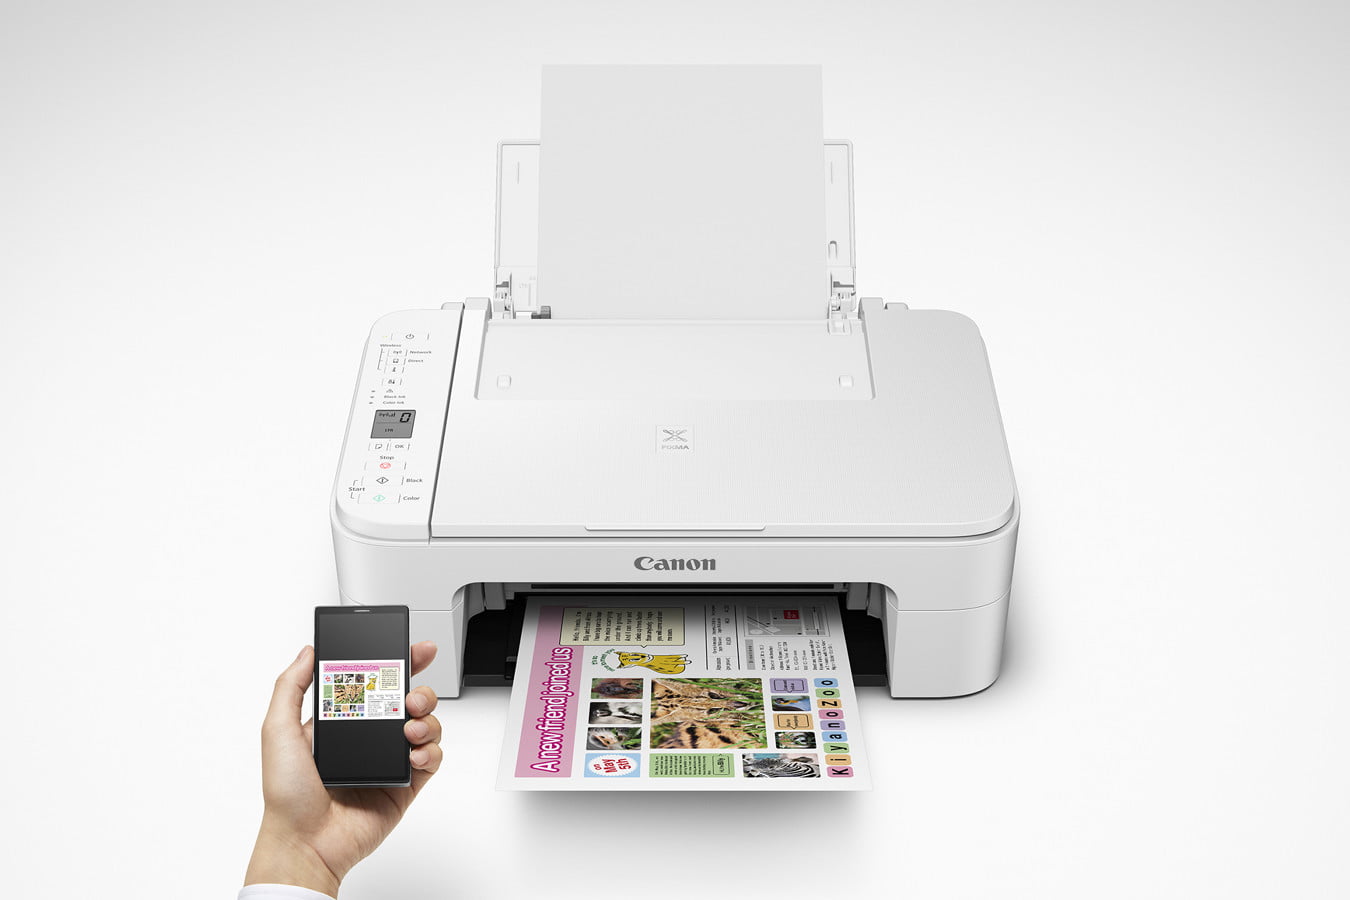 Best cheap printer deals in May 2021